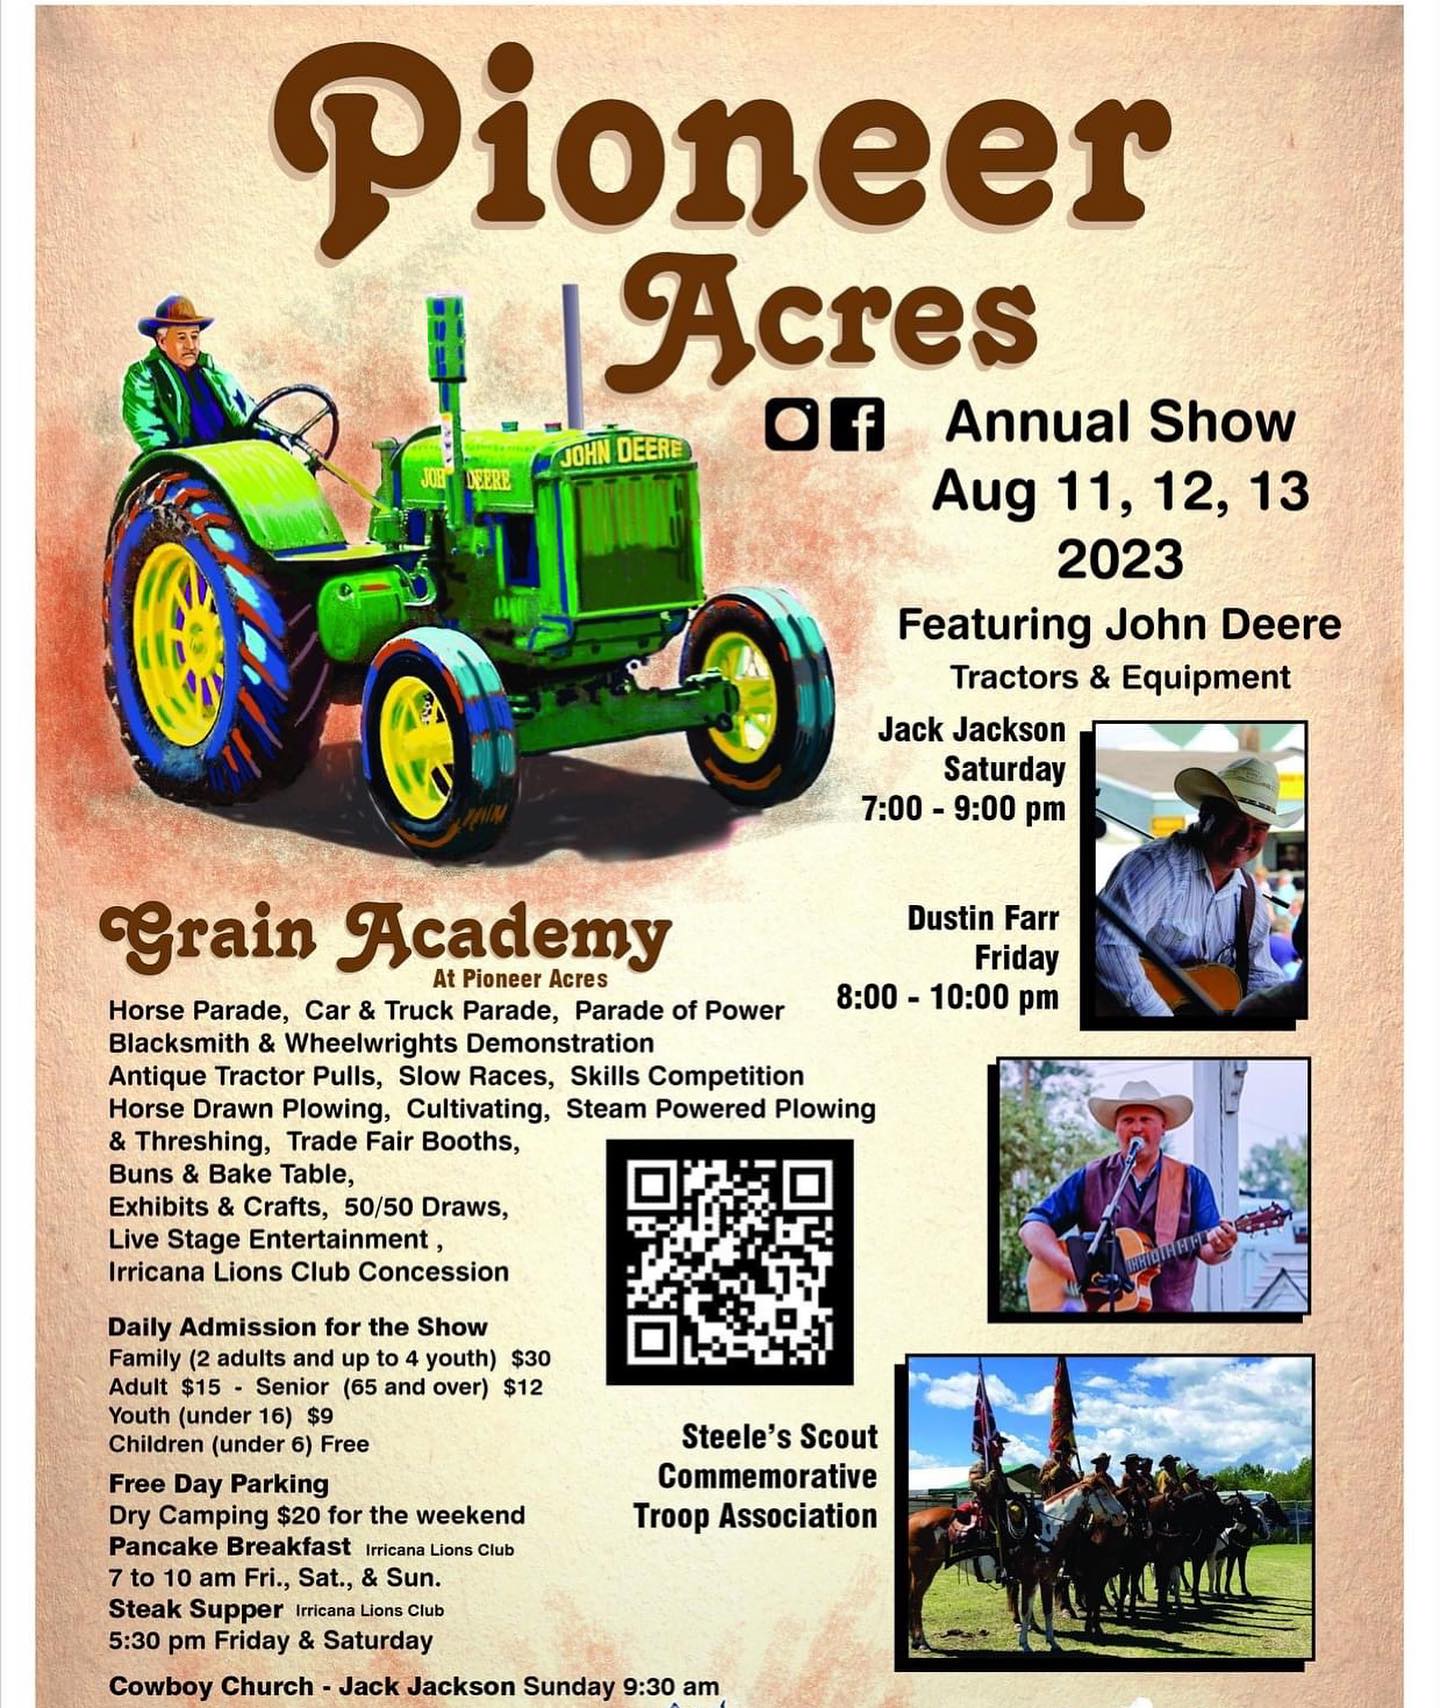 Pioneer Acres Annual Show 2023